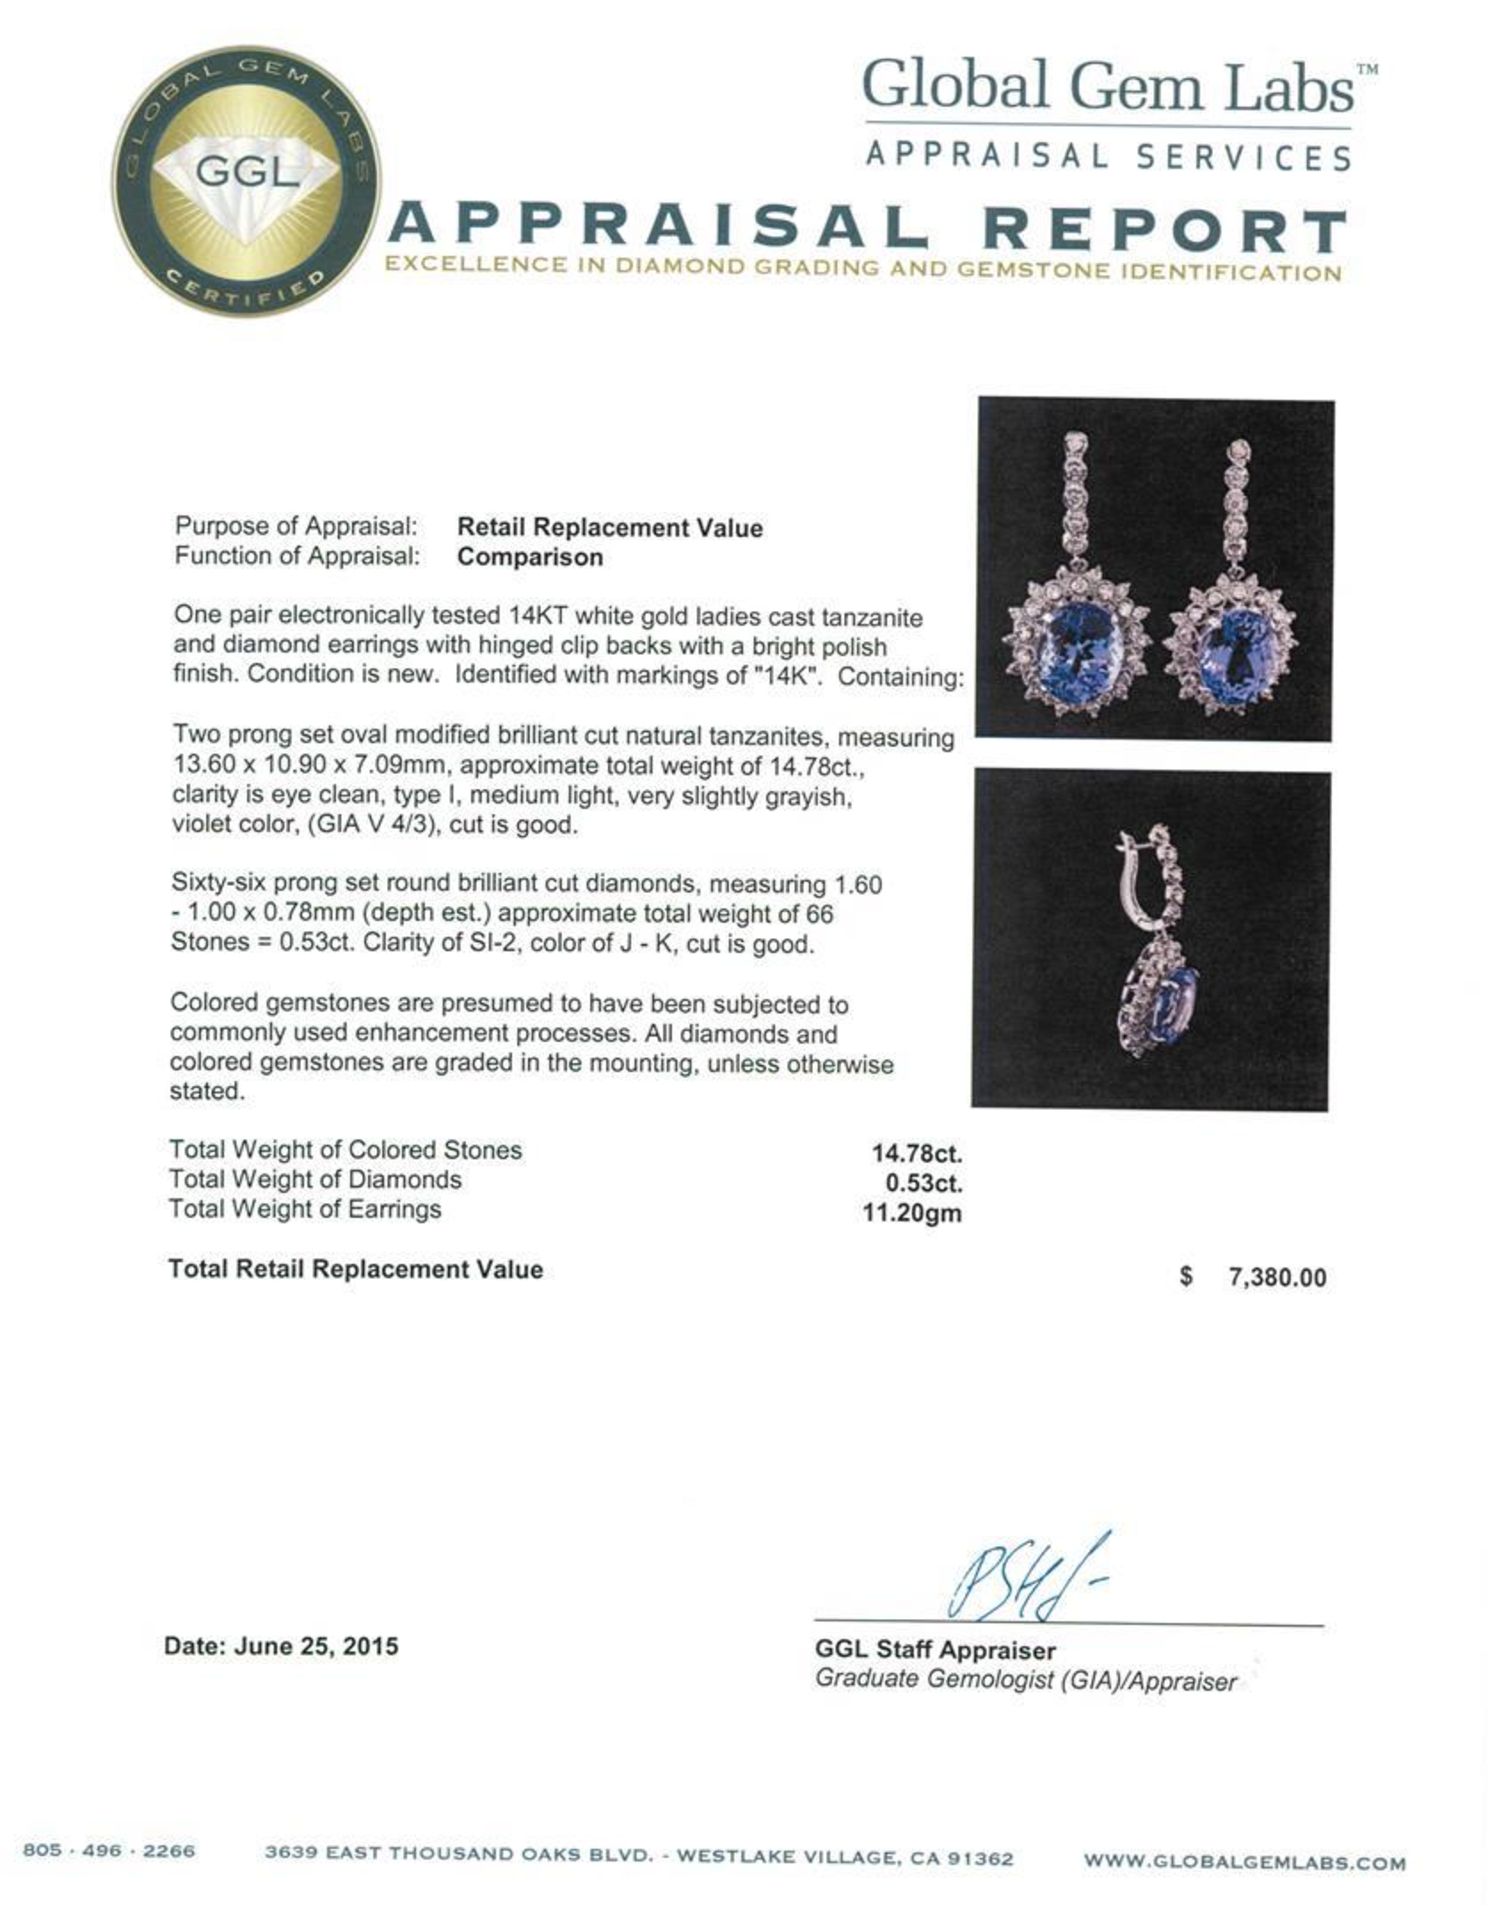 14.78 ctw Tanzanite and Diamond Earrings - 14KT White Gold - Image 3 of 3